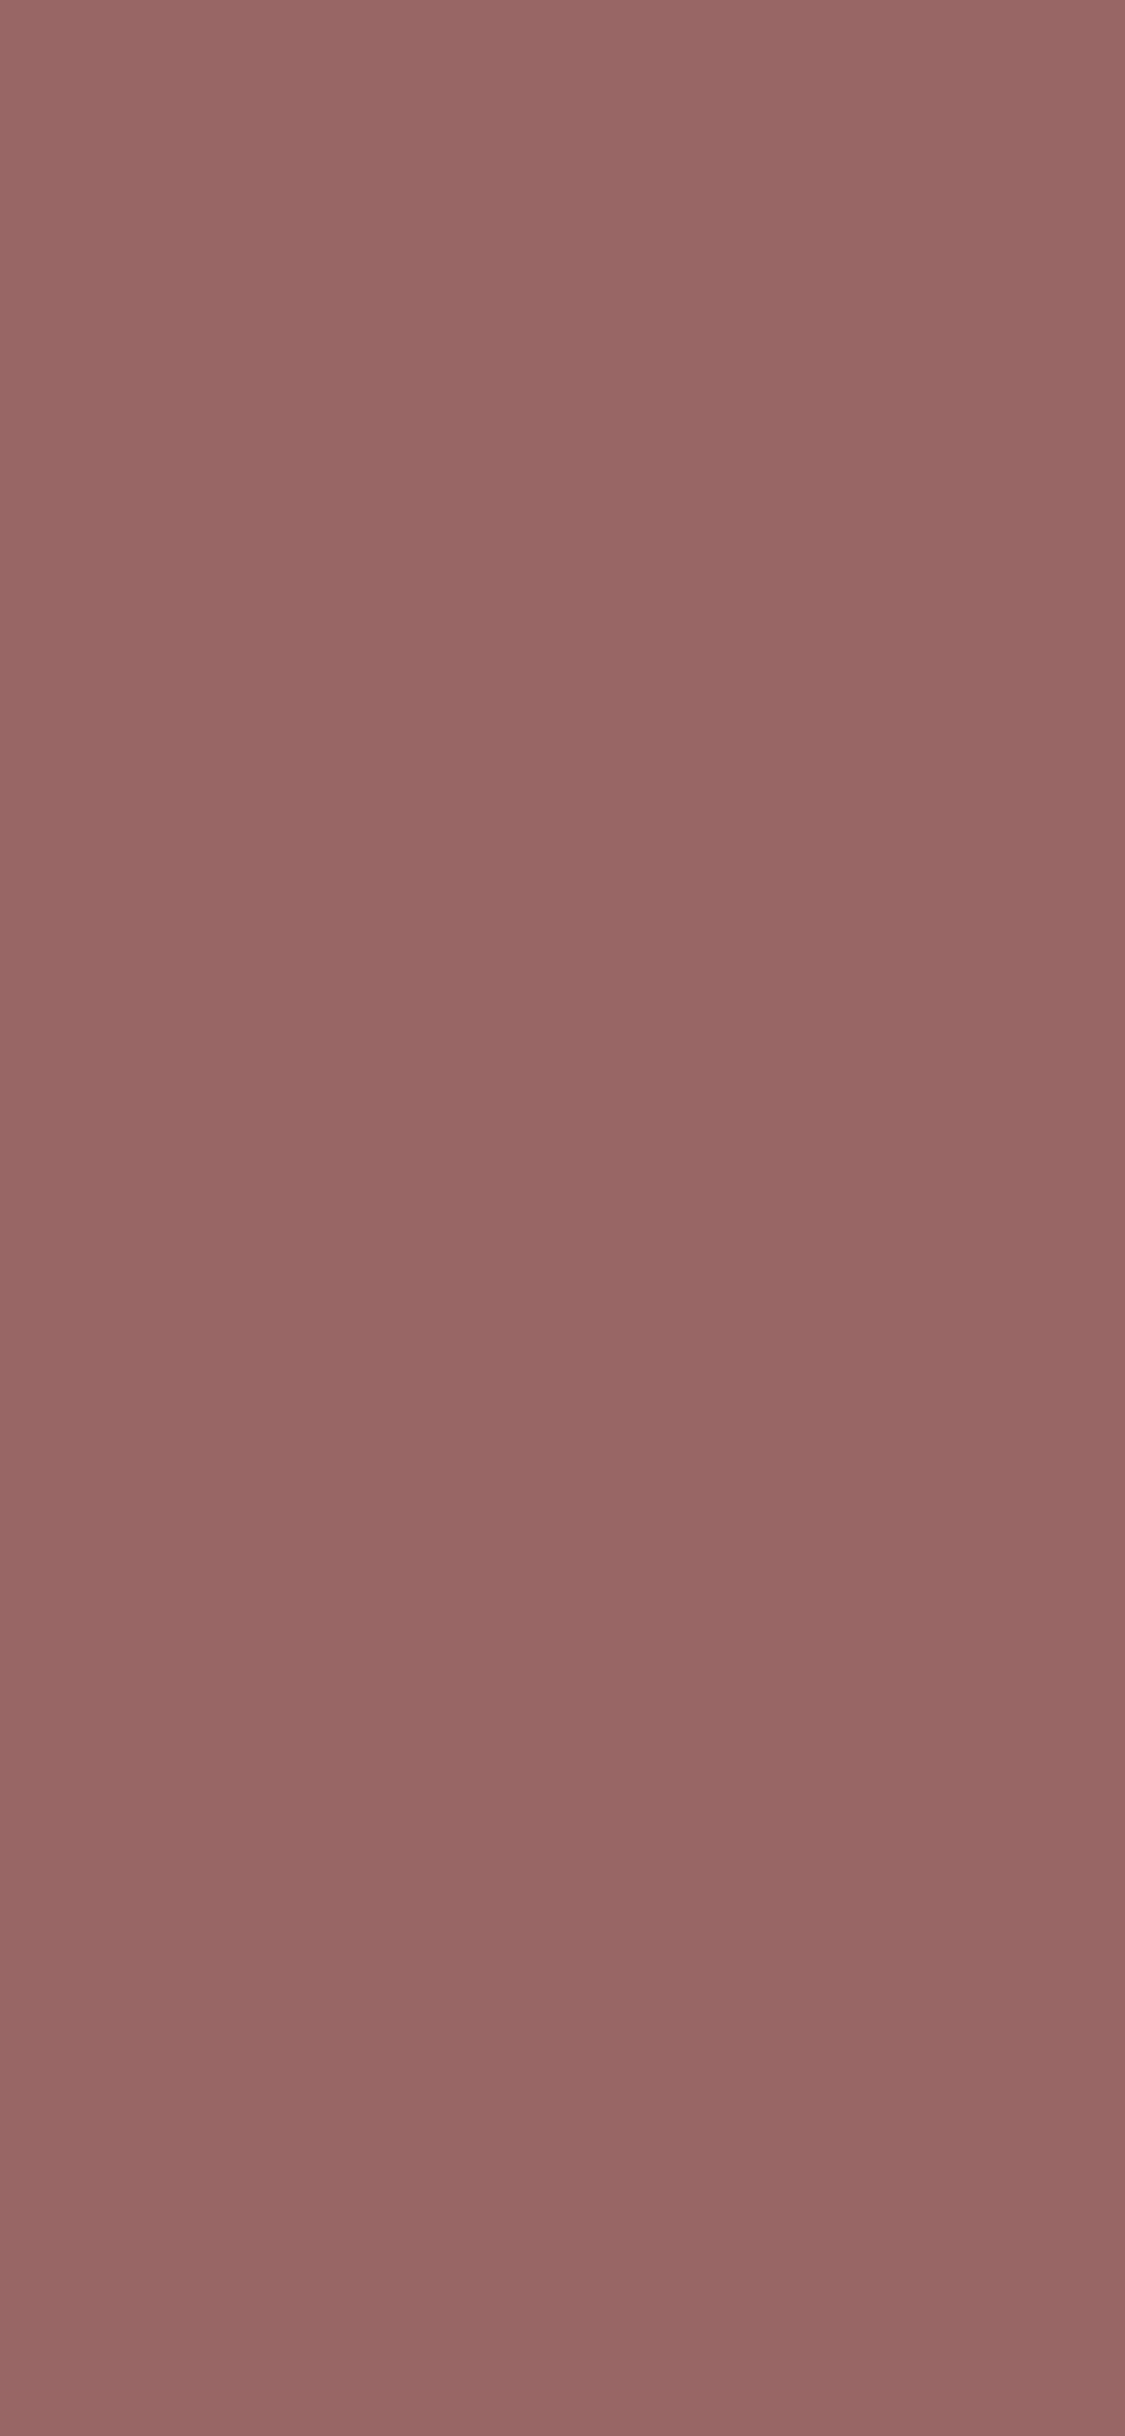 1125x2436 Copper Rose Solid Color Background